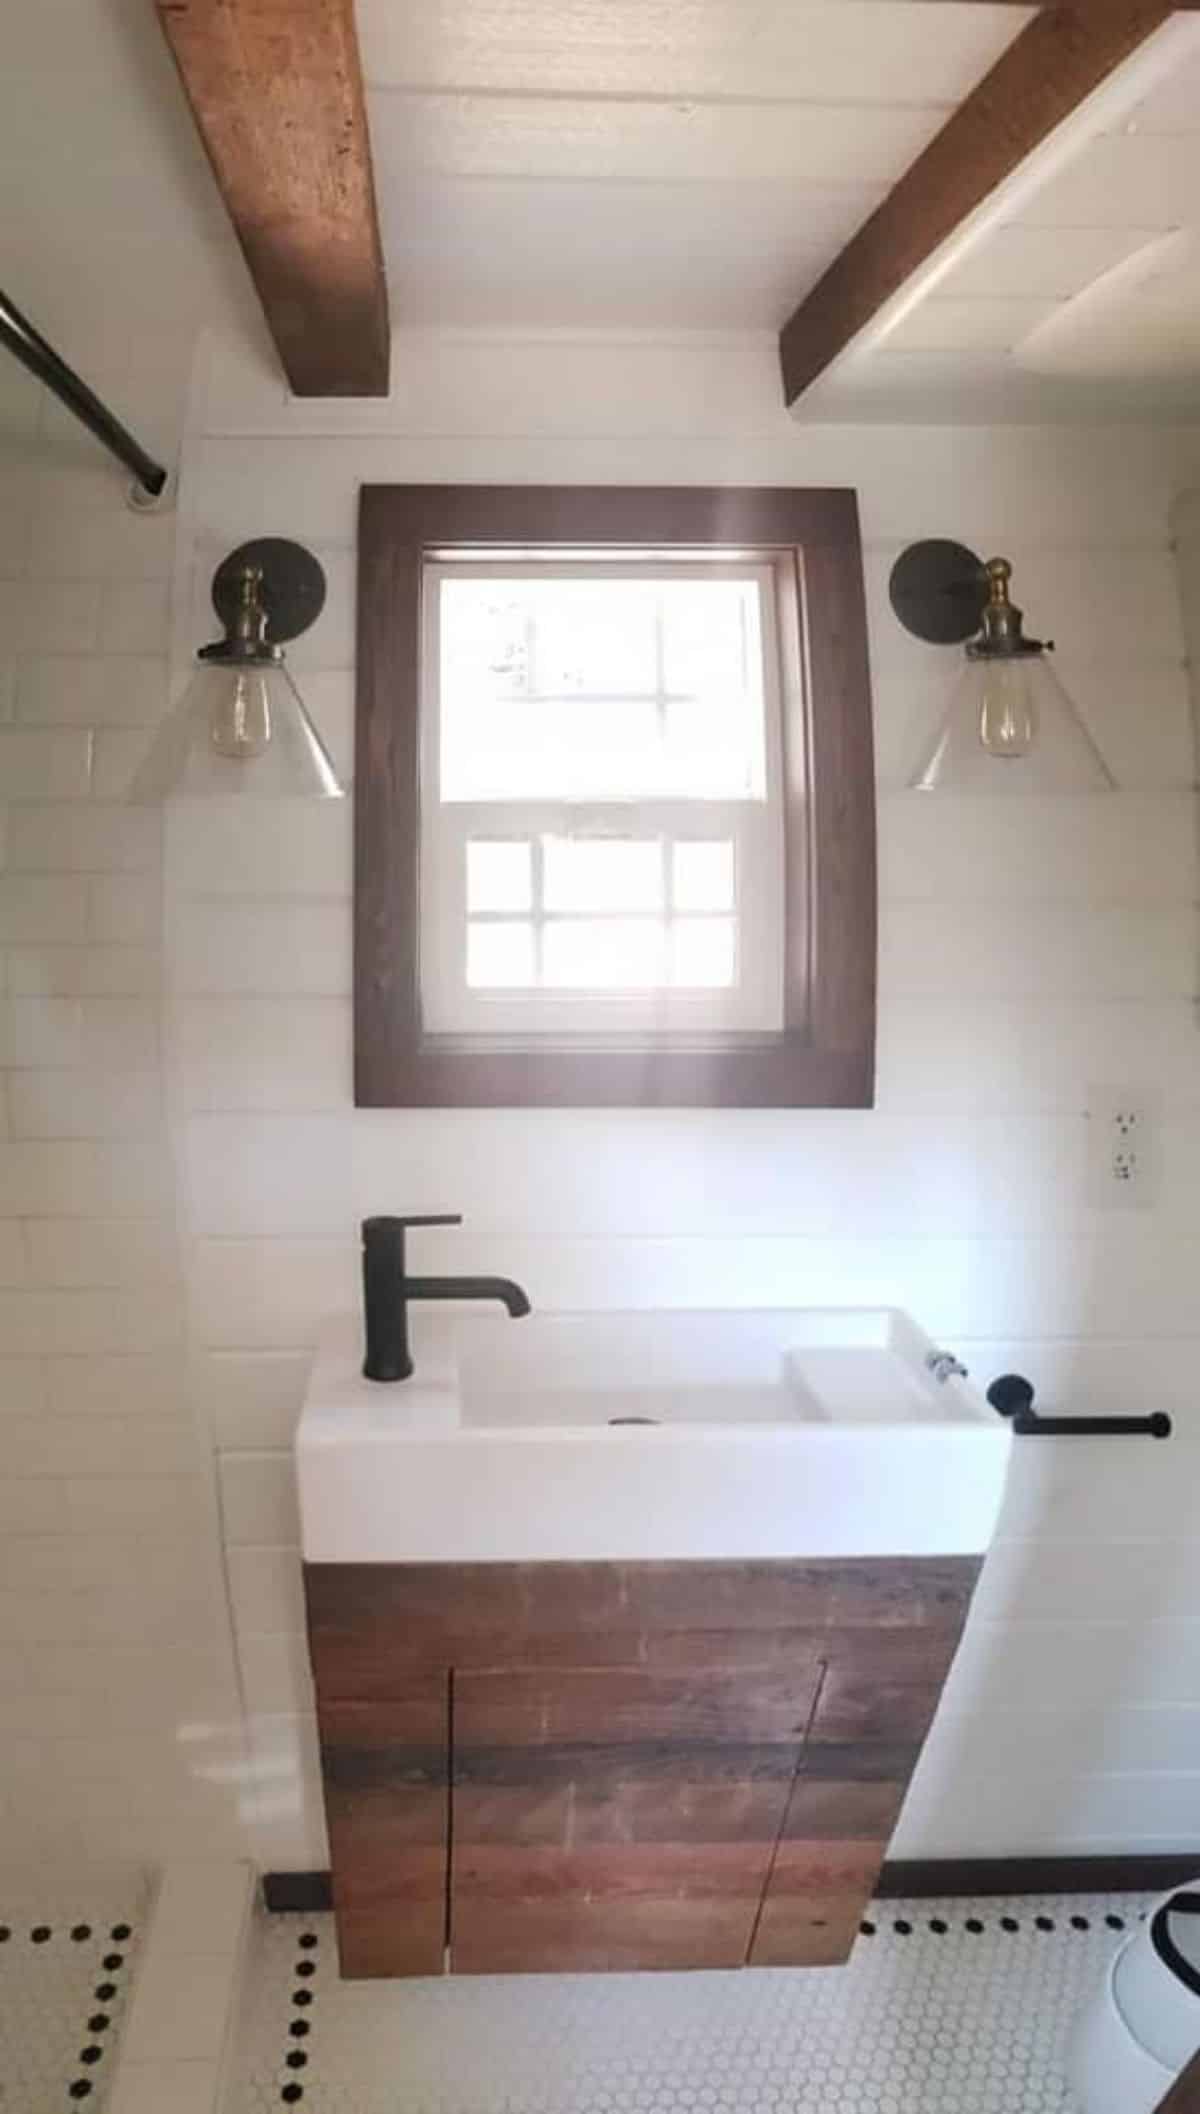 Sink with vanity and window in bathroom of tiny house with two lofts